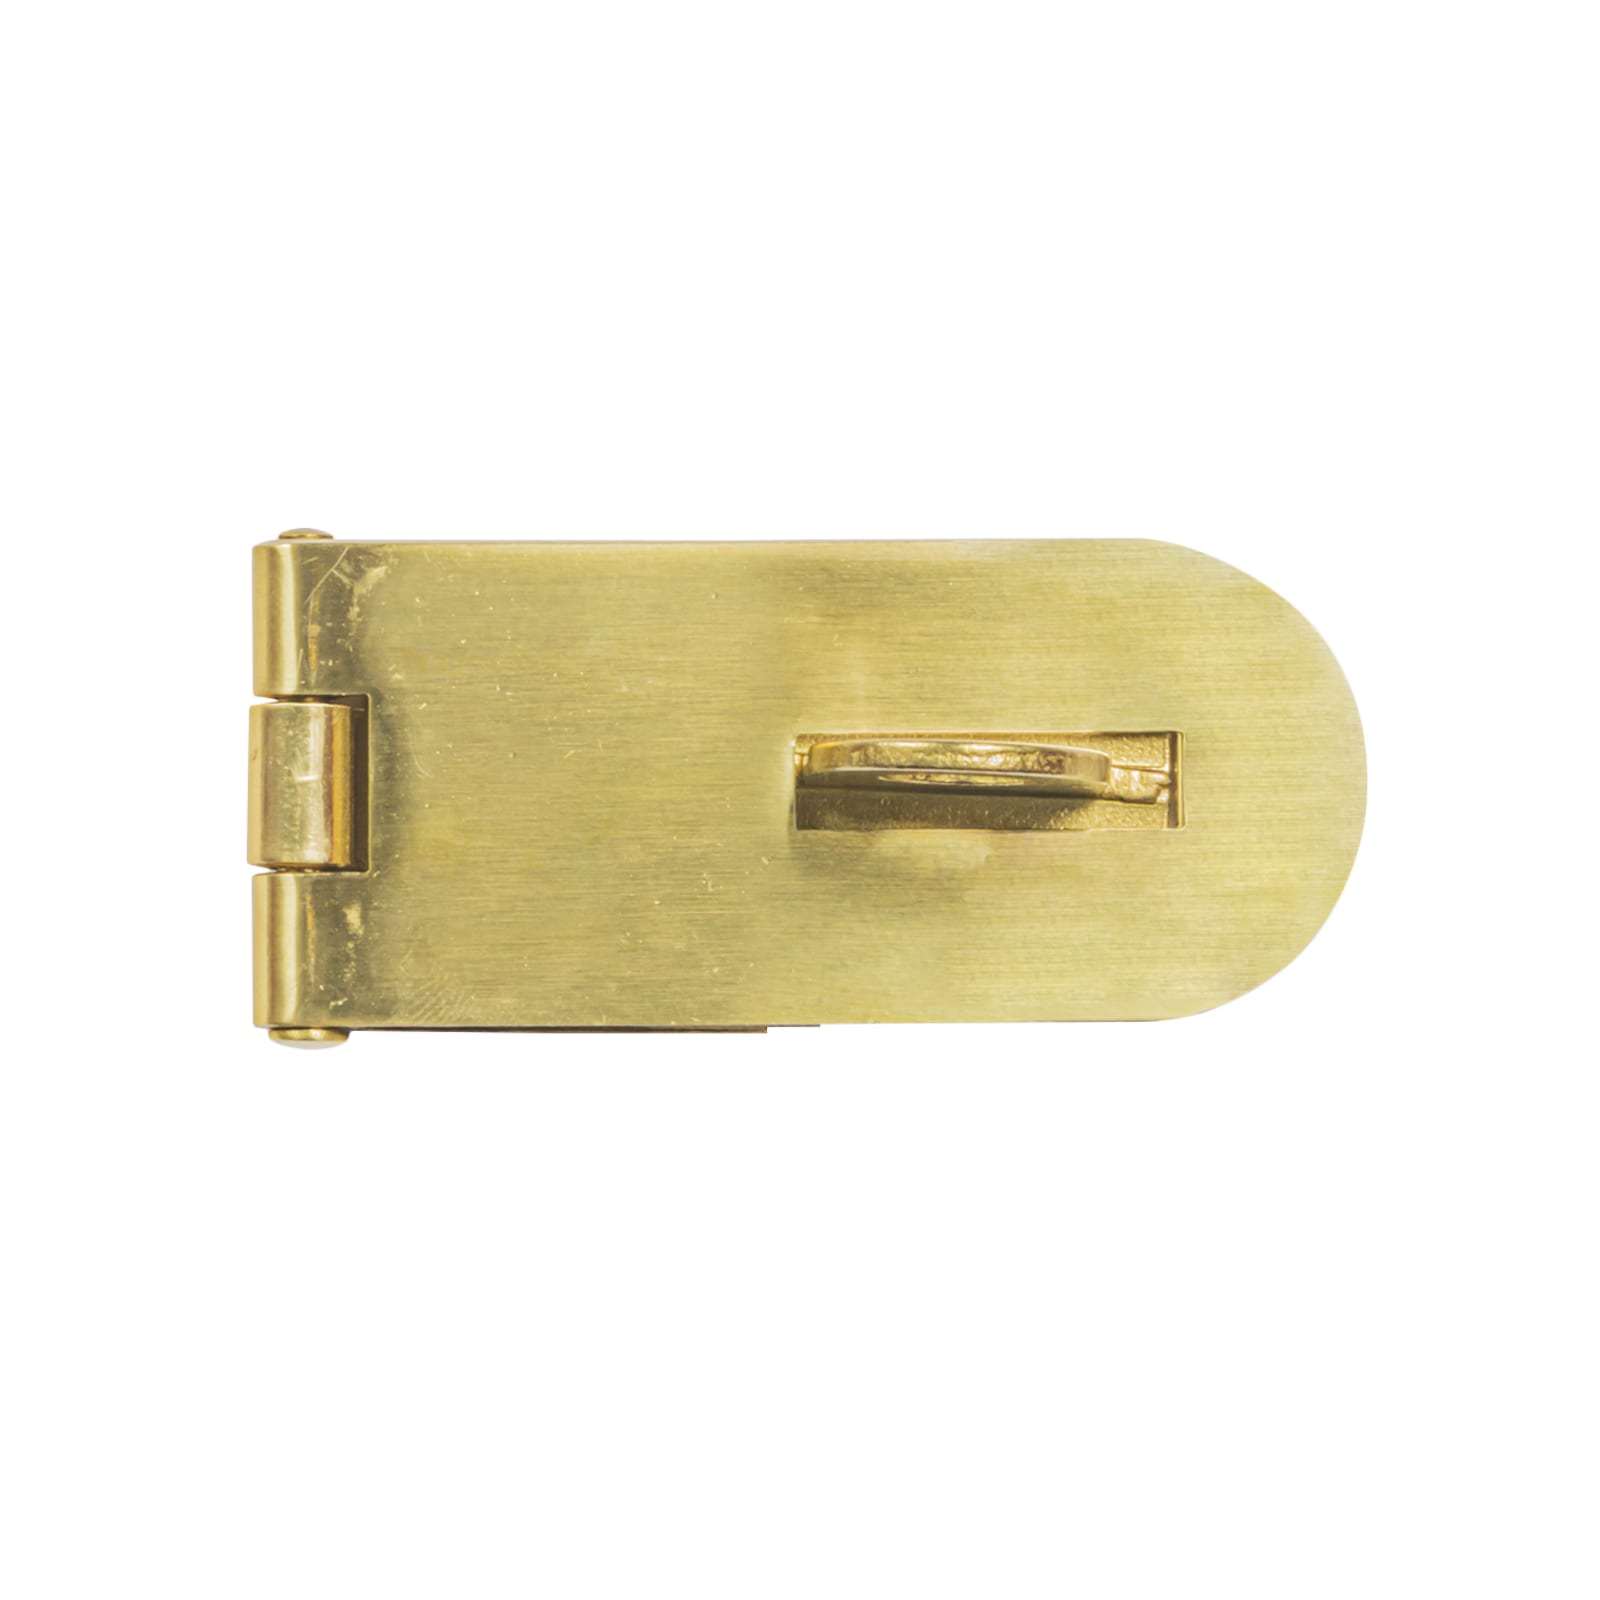 HASP & STAPLE SAFETY PATTERN 75MM SOLID BRASS